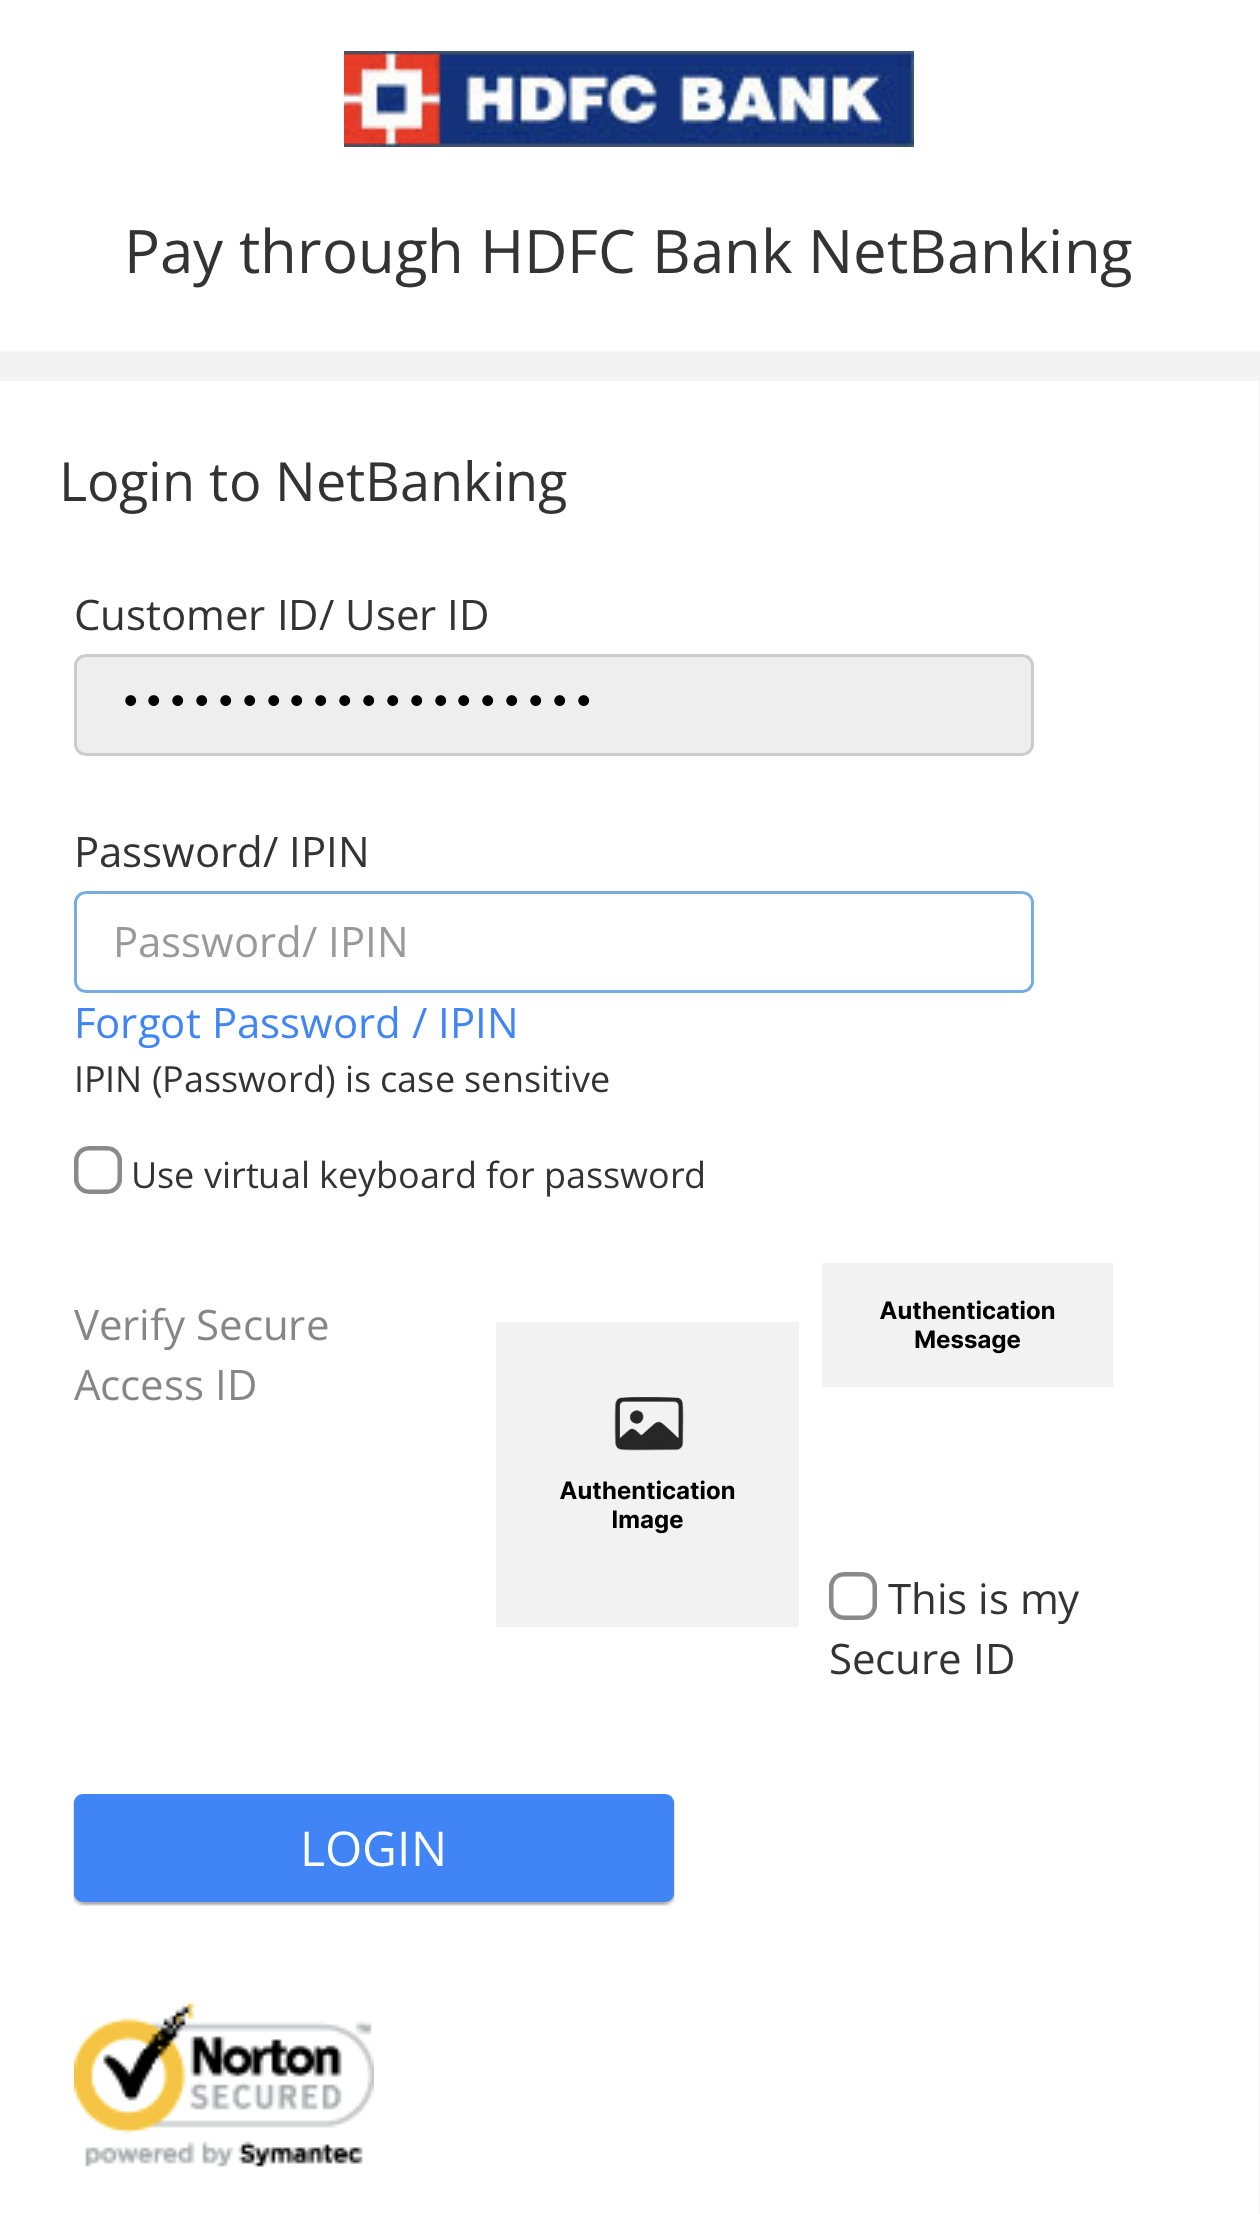 This is a typical HDFC login page displayed on a mobile screen during a payment flow that does not involve Juspay. Note that I have masked my actual details and overlaid them with gray boxes.